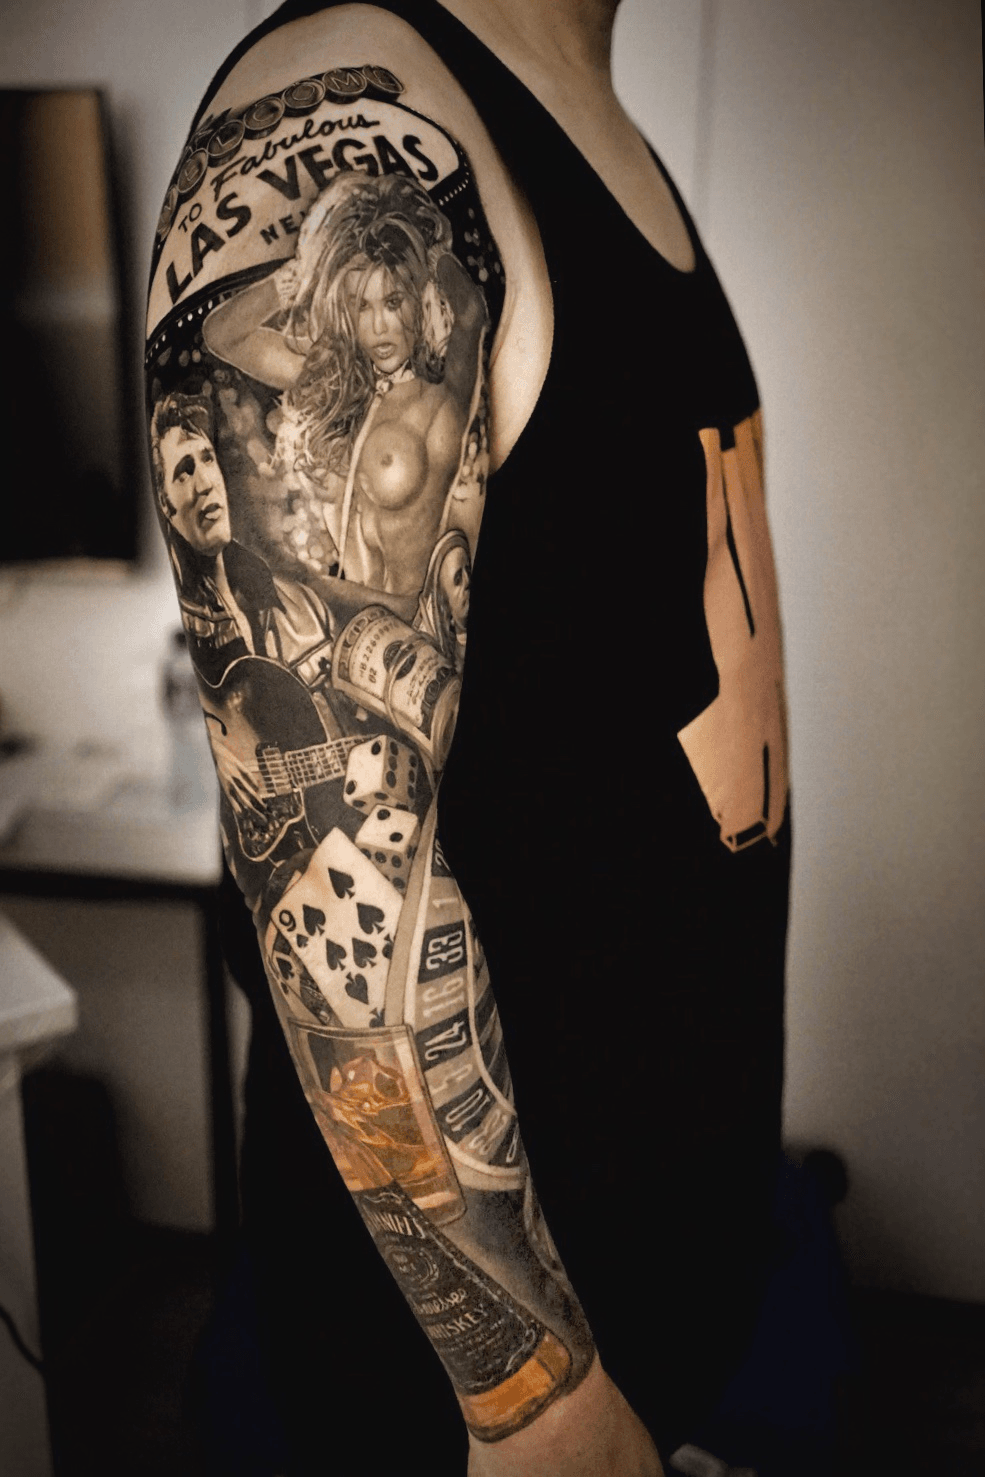 101 Best Lifes A Gamble Tattoo Ideas You Have To See To Believe  Outsons